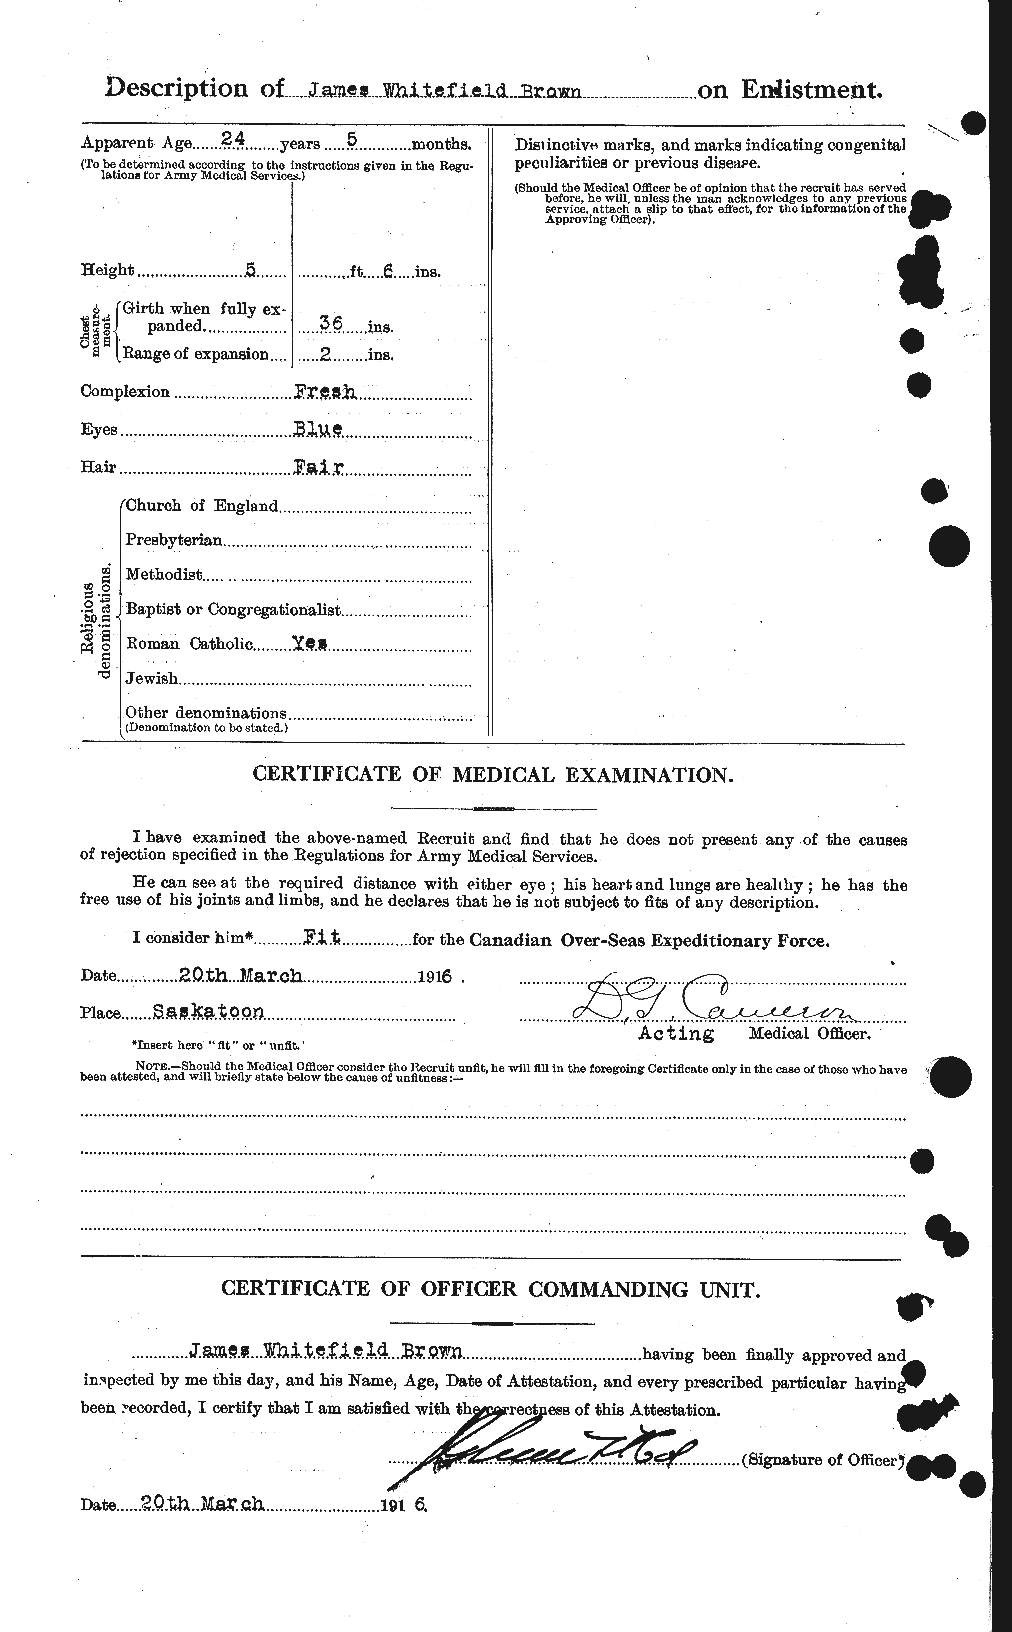 Personnel Records of the First World War - CEF 269596b